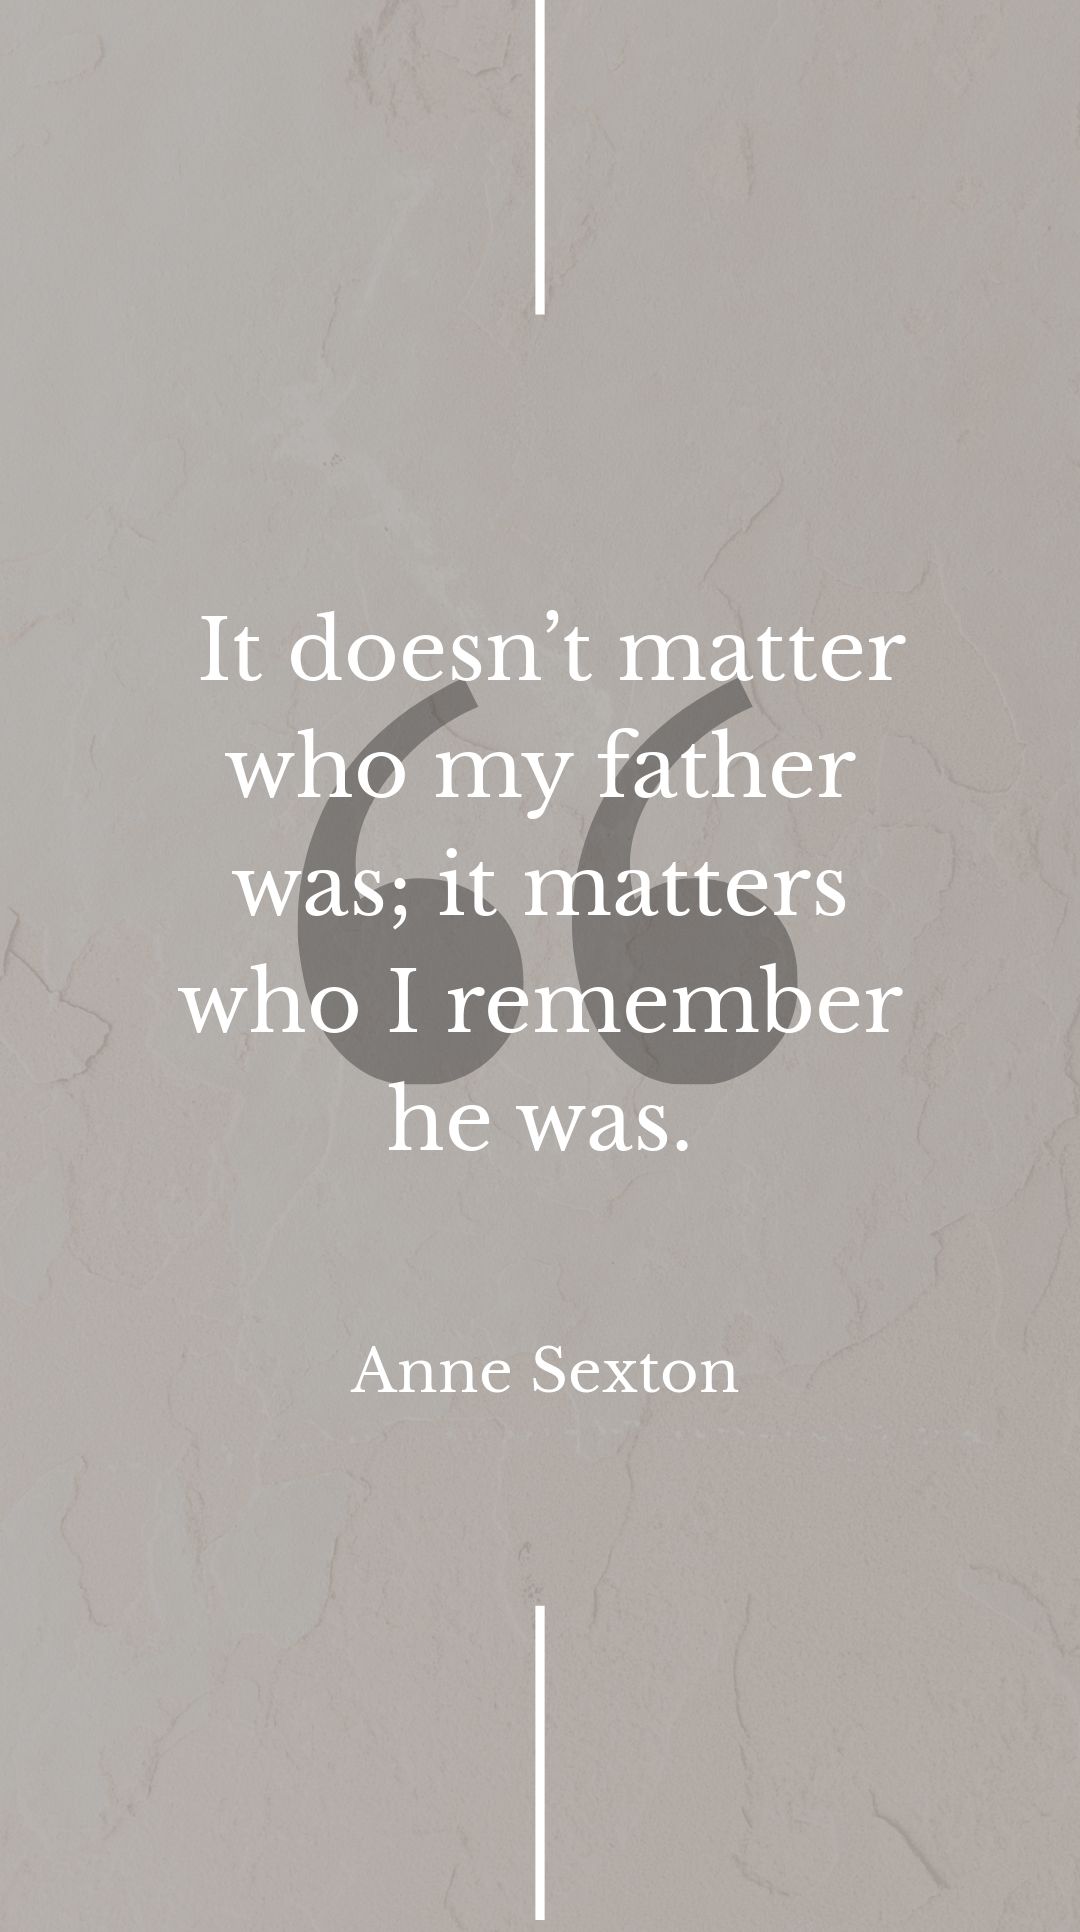 Anne Sexton - It doesn’t matter who my father was; it matters who I remember he was. in JPG